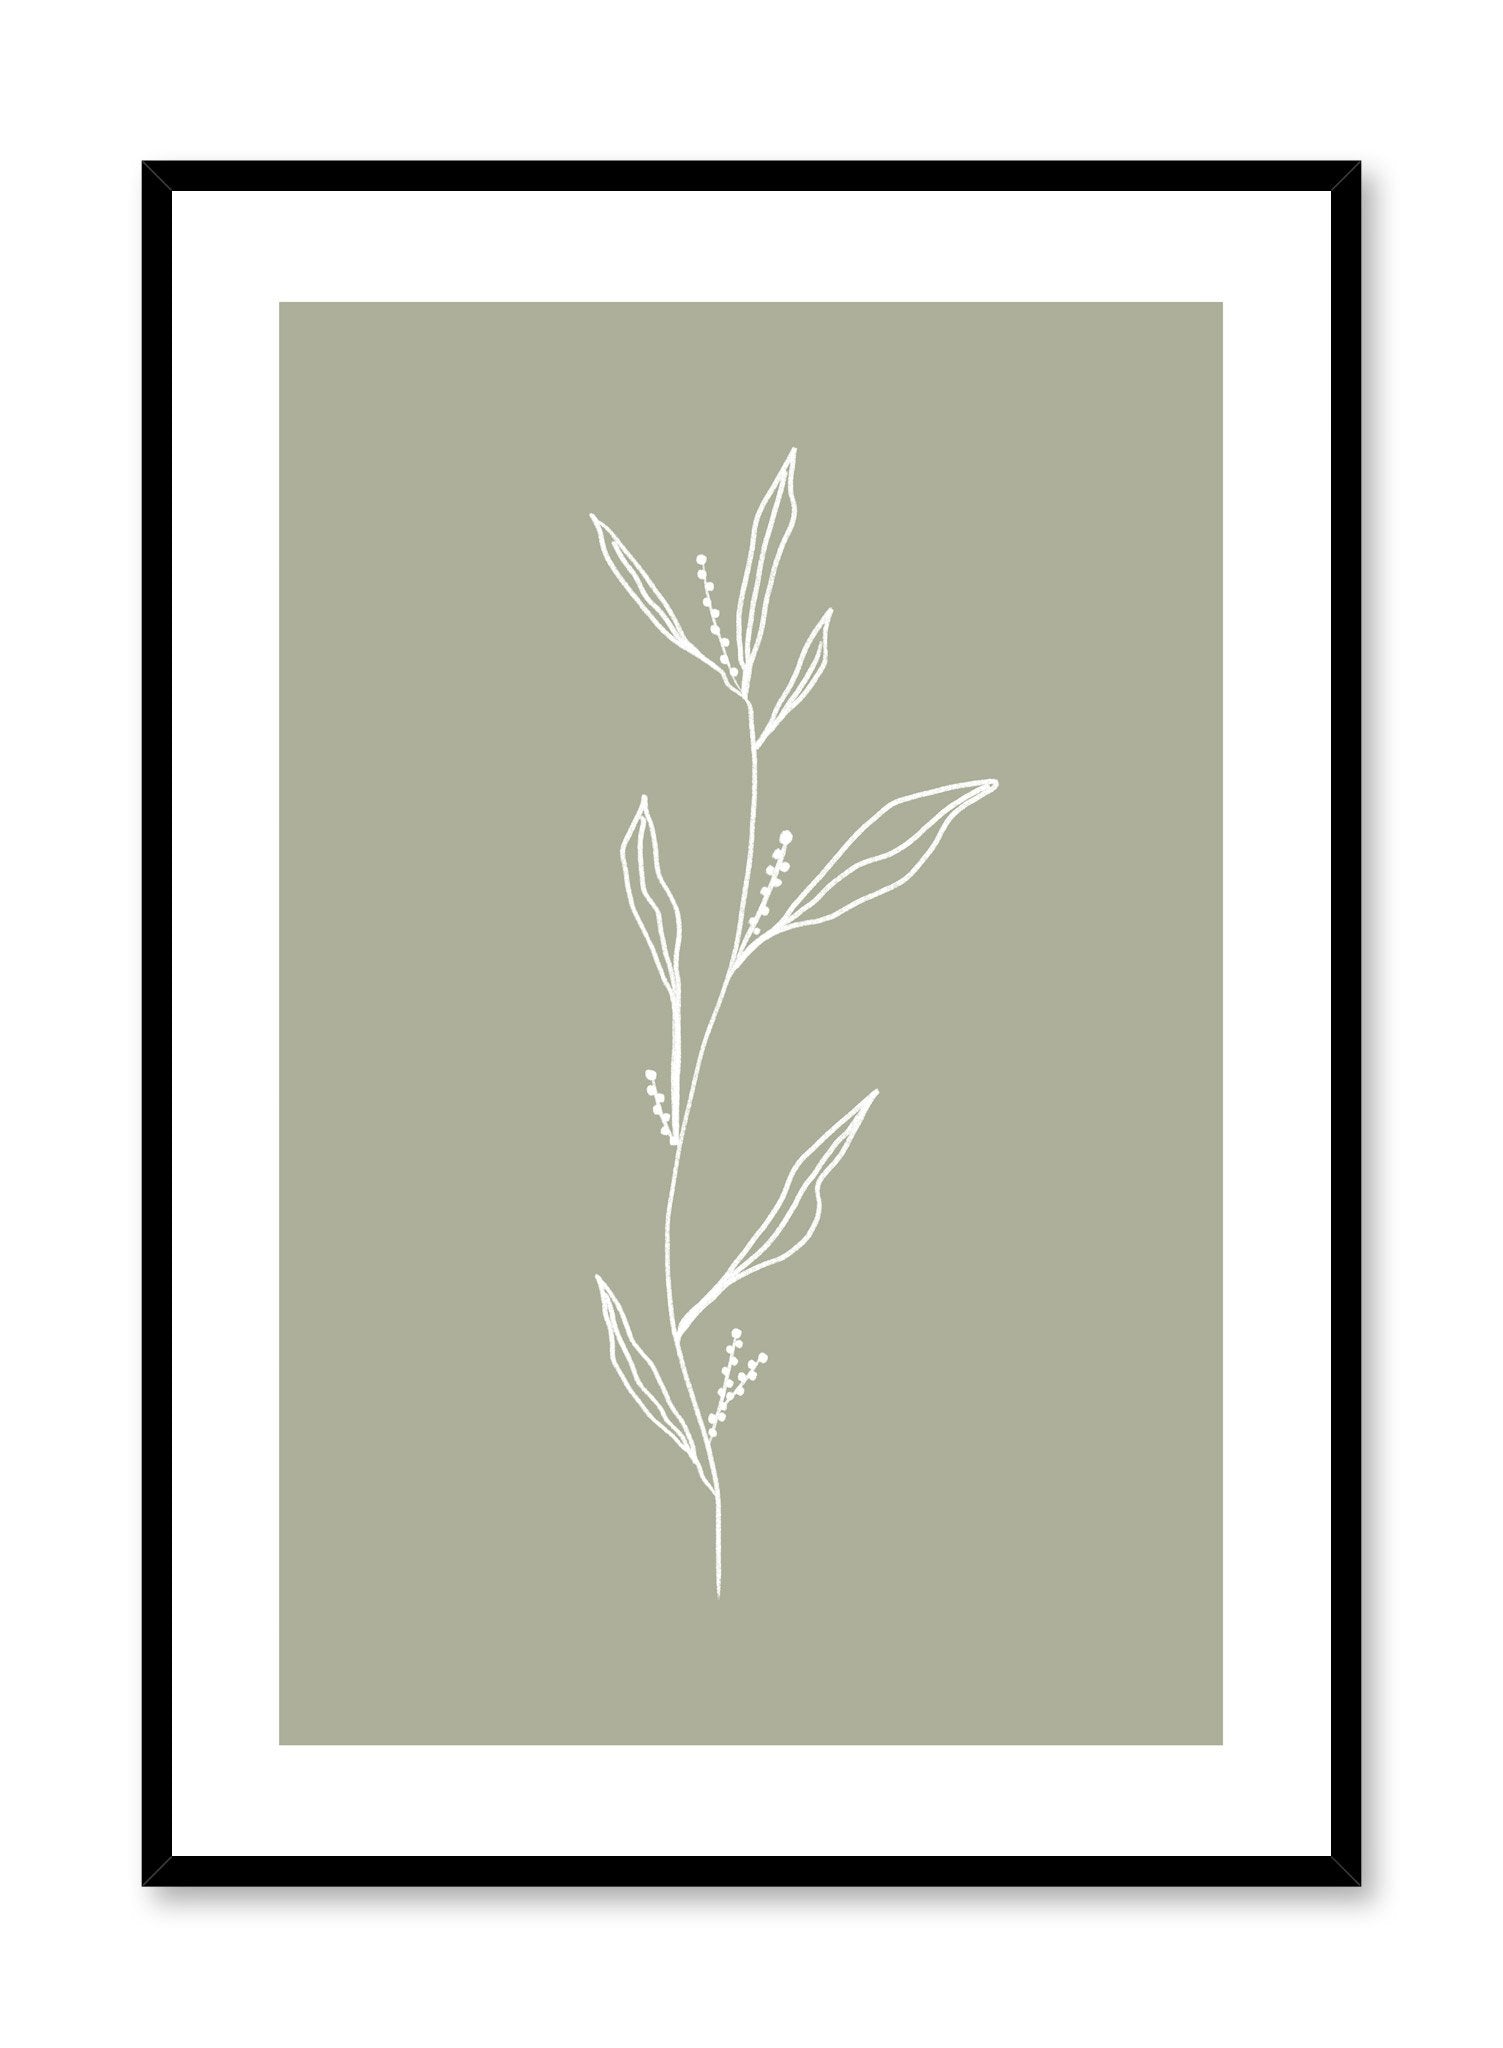 Modern minimalist botanical illustration poster by Opposite Wall with delicate sprig